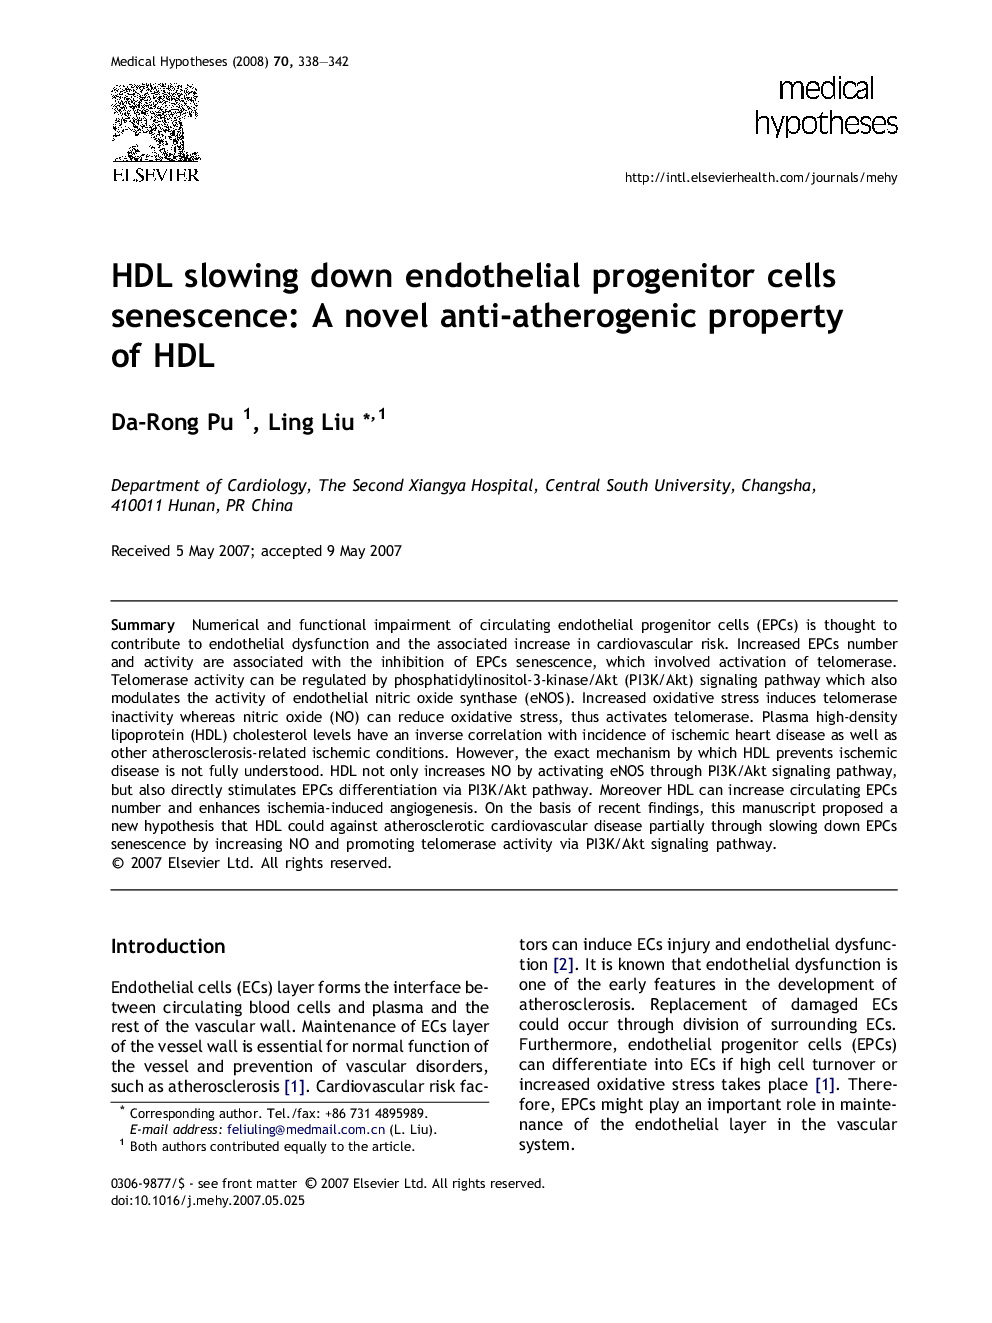 HDL slowing down endothelial progenitor cells senescence: A novel anti-atherogenic property of HDL